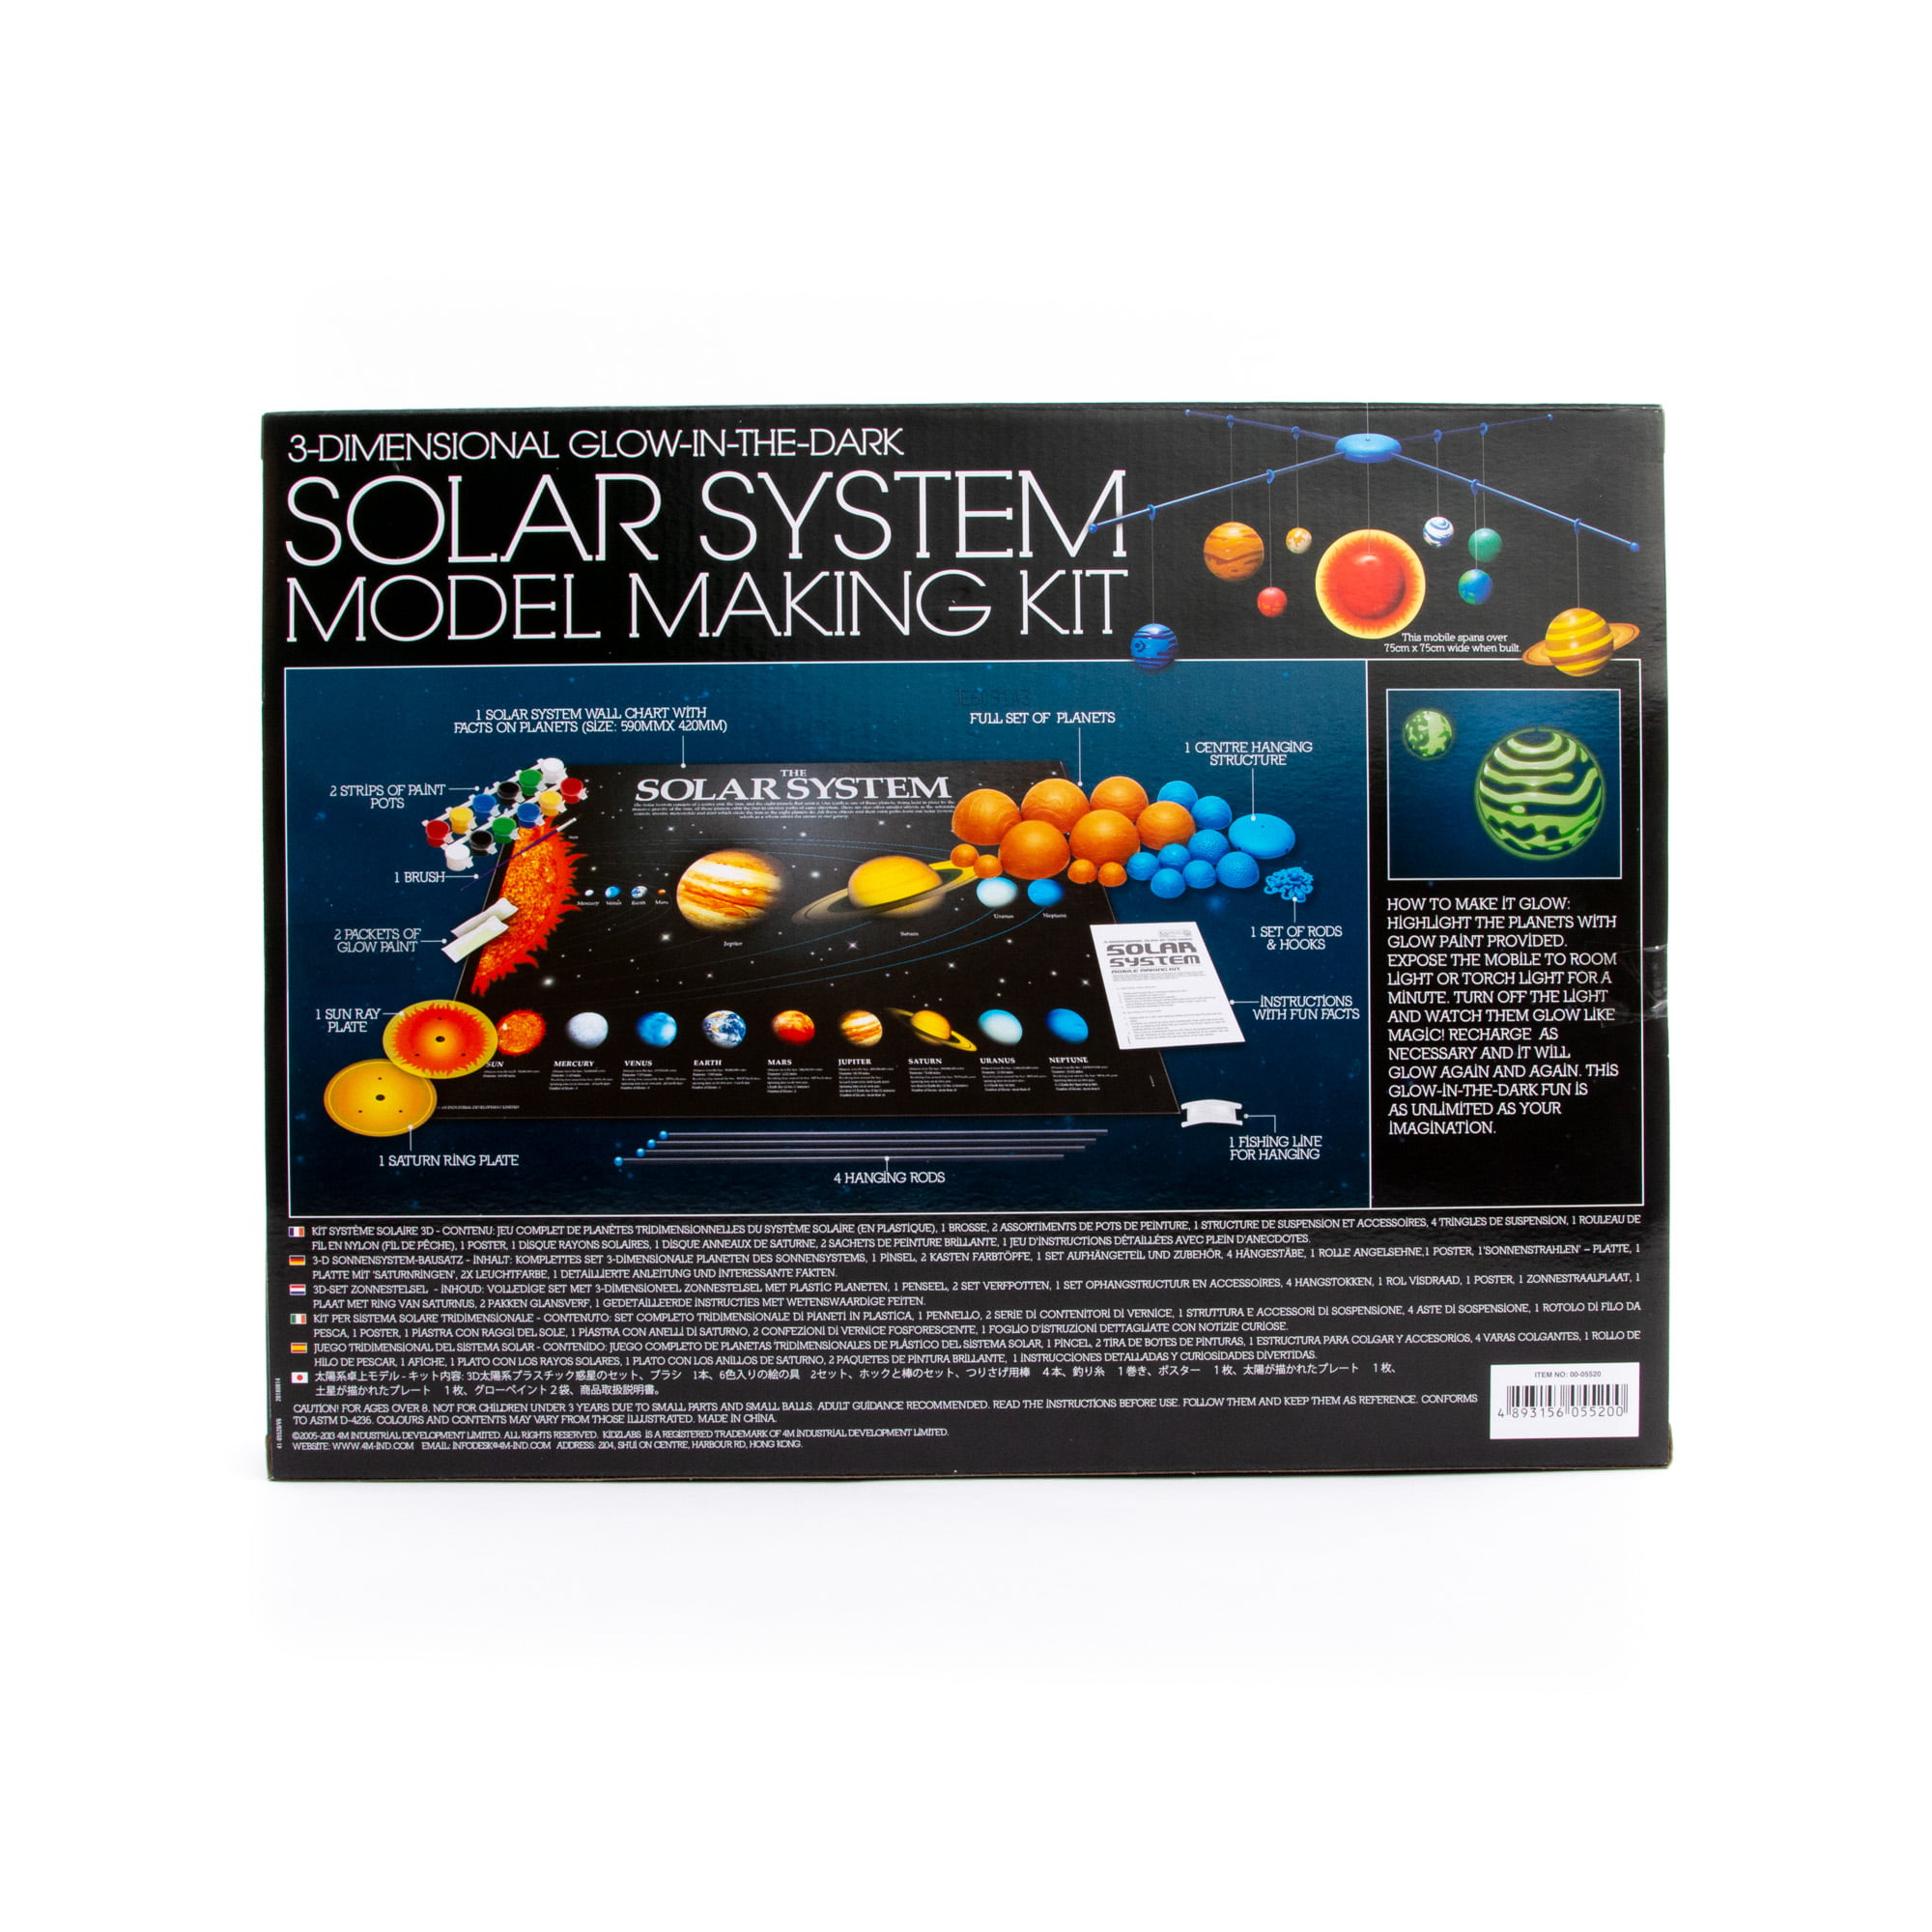 4M 3 Dimensional Glow in The Dark Solar System Mobile Making Kit for sale online 